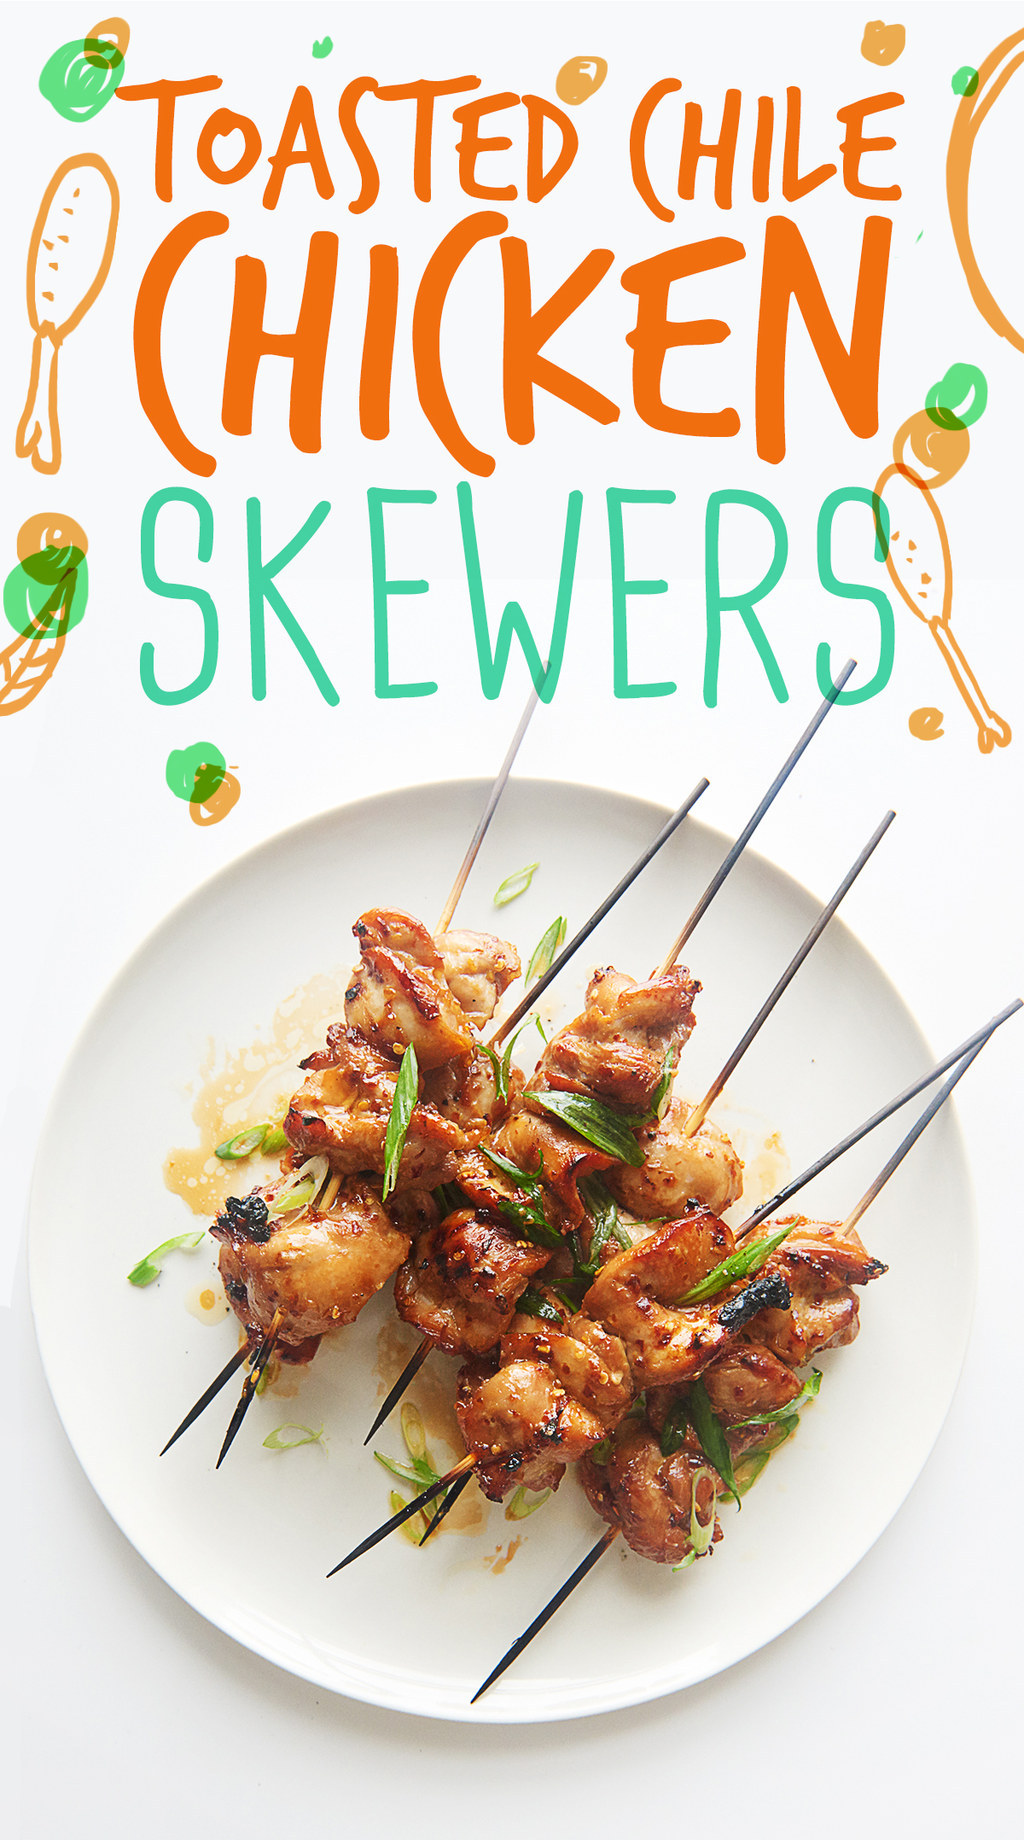 How To Make Toasted Chile Chicken Skewers